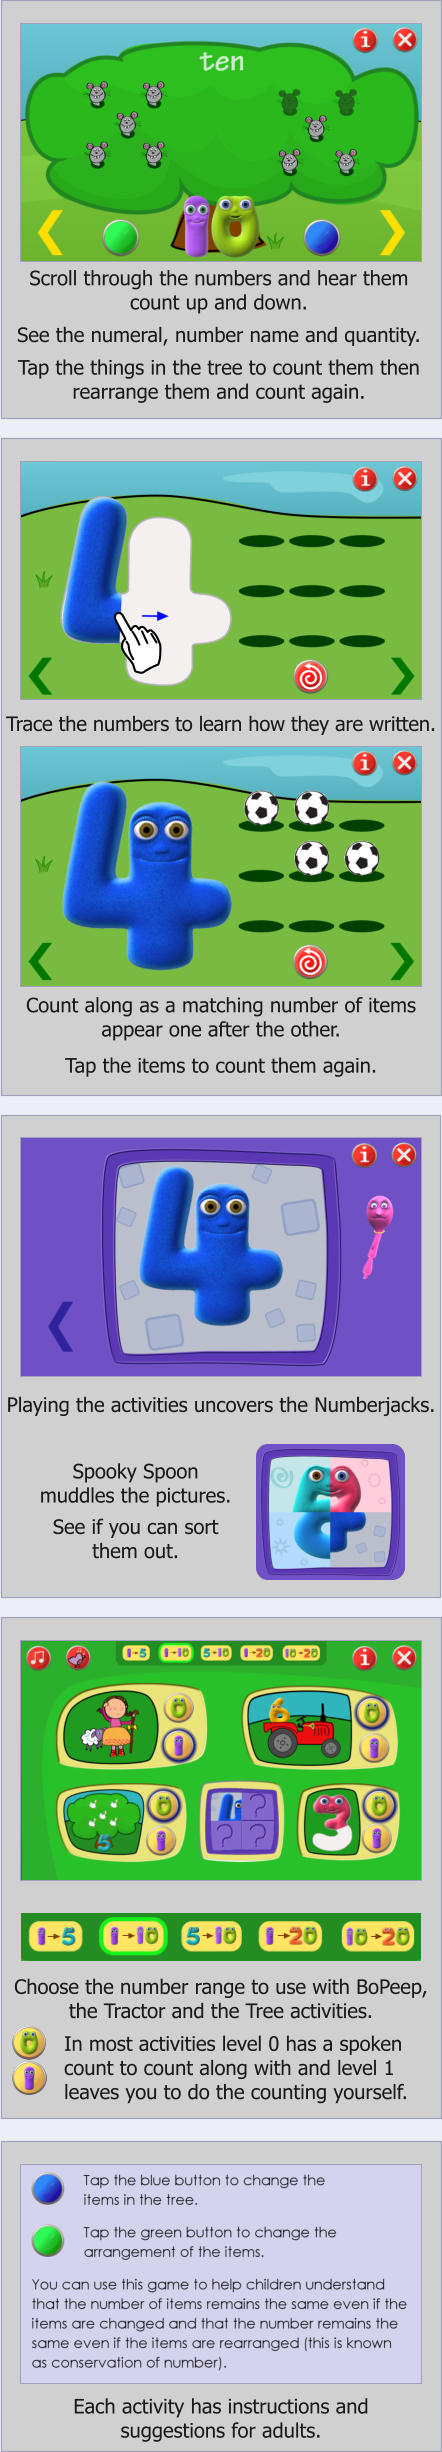 Scroll through the numbers and hear them count up and down.   See the numeral, number name and quantity.  Tap the things in the tree to count them then rearrange them and count again. Trace the numbers to learn how they are written. Count along as a matching number of items appear one after the other.  Tap the items to count them again. Playing the activities uncovers the Numberjacks. Spooky Spoon muddles the pictures.   See if you can sort  them out. Choose the number range to use with BoPeep, the Tractor and the Tree activities. In most activities level 0 has a spoken count to count along with and level 1 leaves you to do the counting yourself. Each activity has instructions and suggestions for adults.